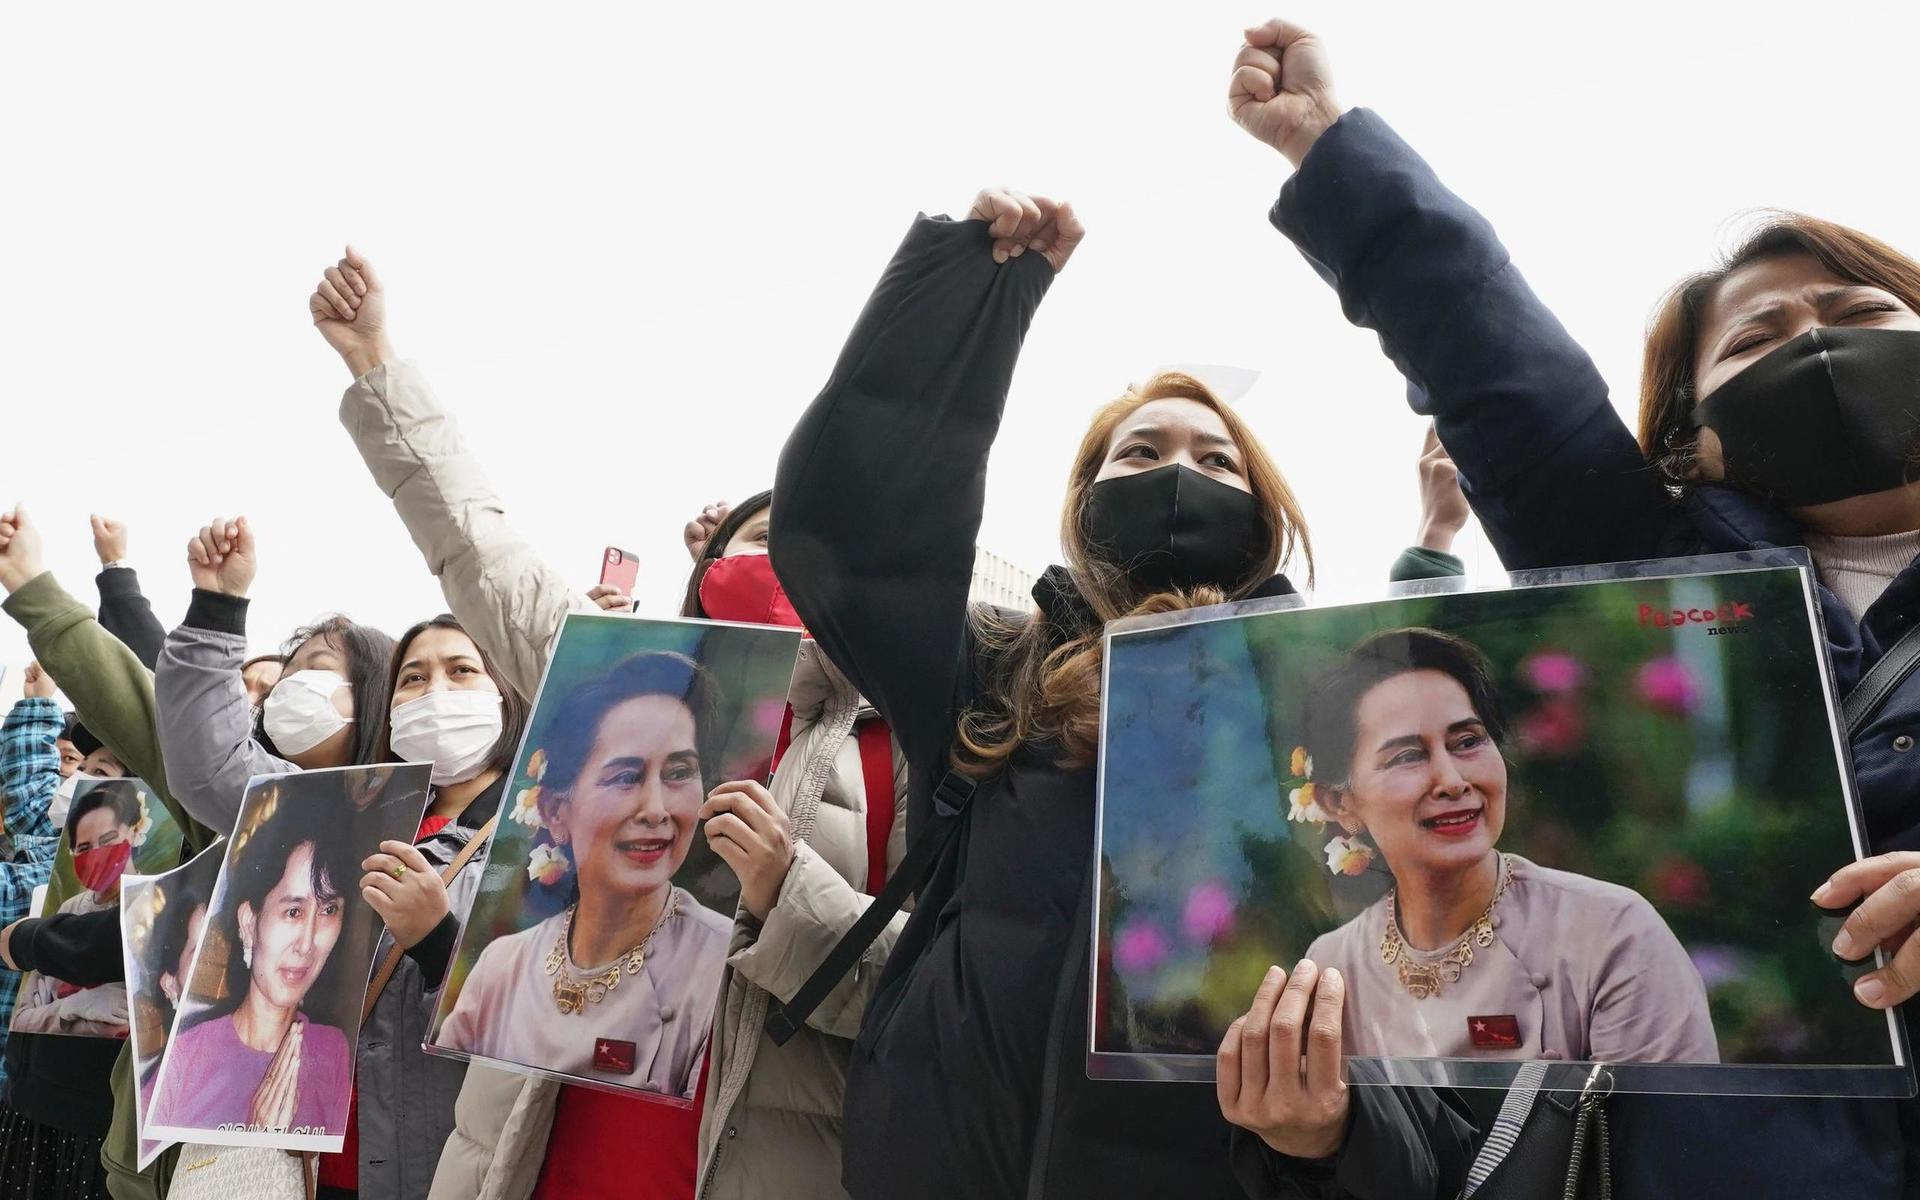 People holding portraits of Myanmar&apos;s de facto government leader Aung San Suu Kyi stage a protest rally in front of the United Nations University in Tokyo Monday, Feb. 1, 2021, after Myanmar&apos;s military was taking control of the country for one year. (Chika Oshima/Kyodo News via AP)  TKTT802